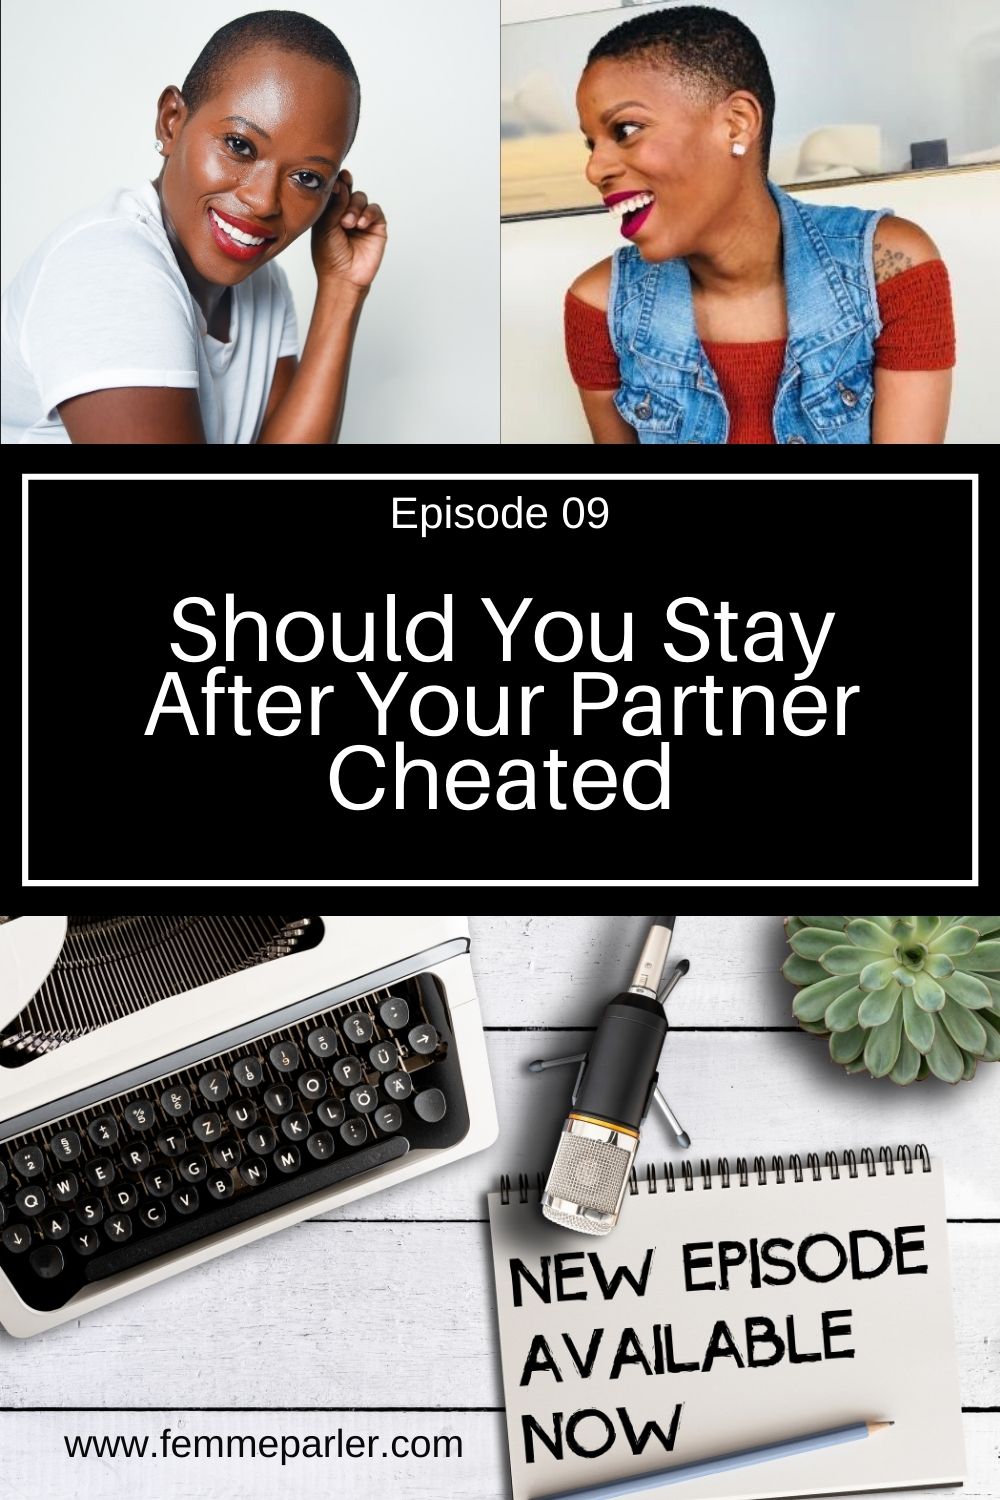 SHOULD YOU STAY AFTER YOUR PARTNER CHEATED